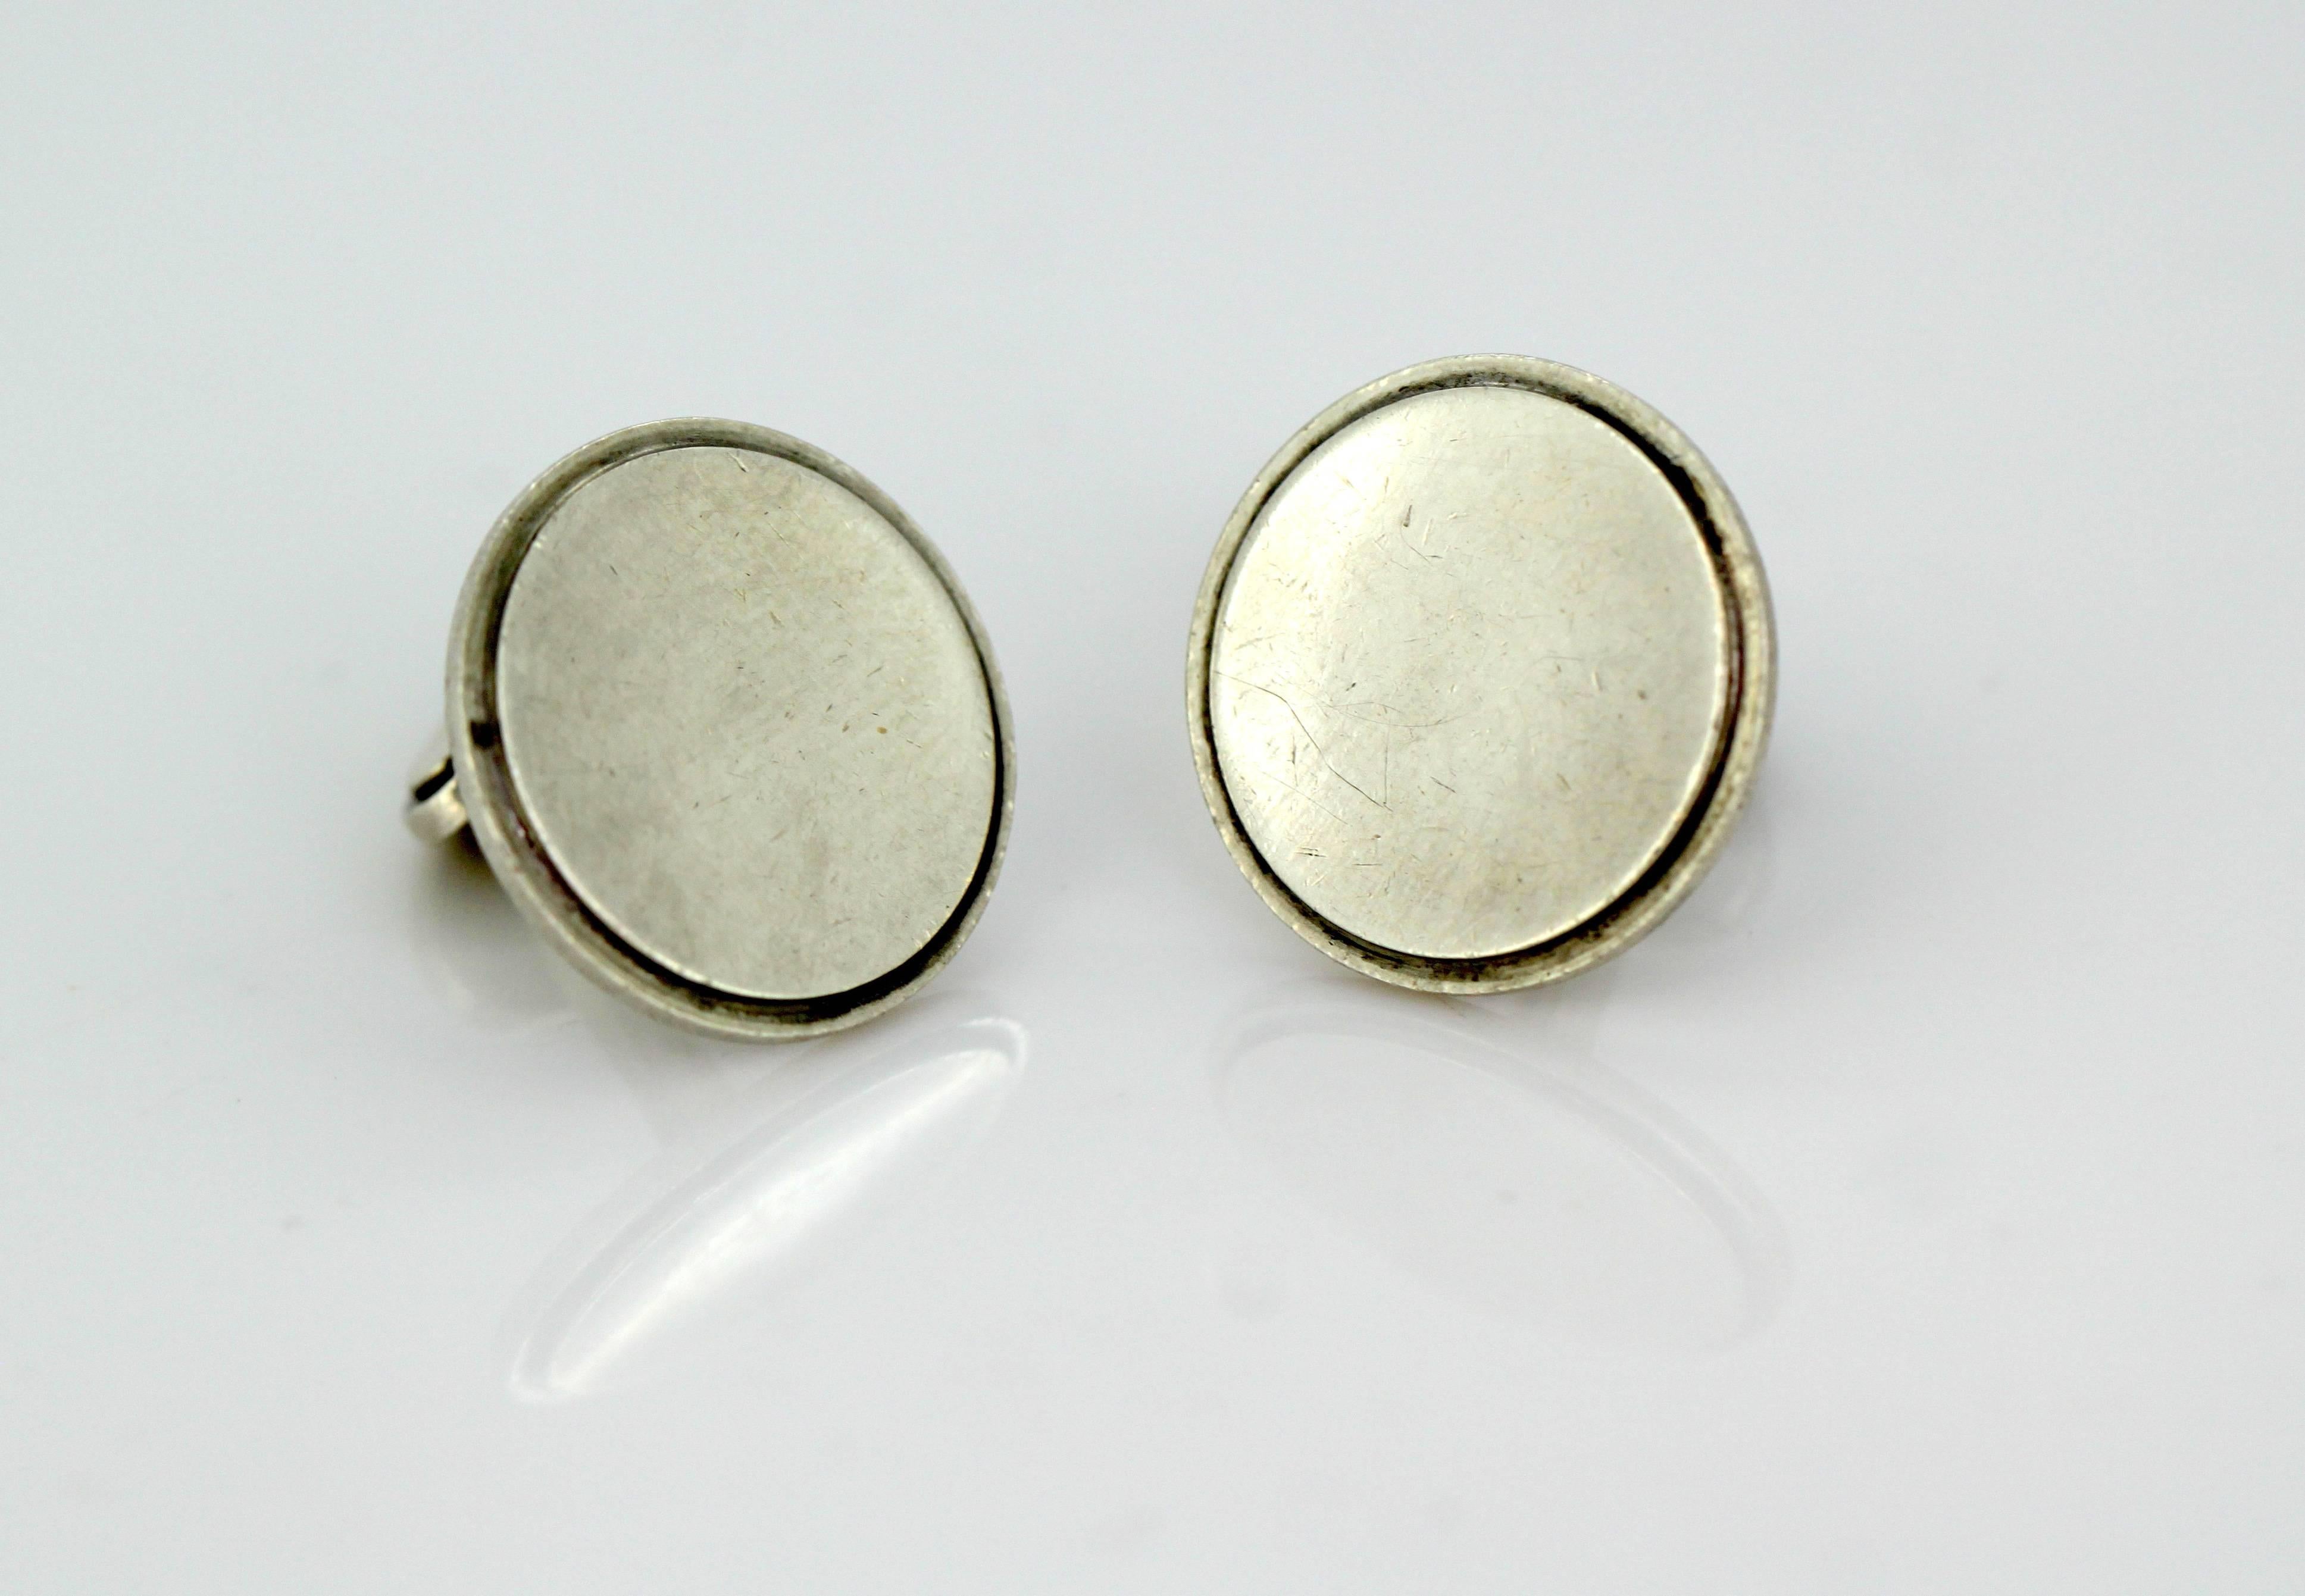 Vintage silver mens cufflinks
Maker : Georg Jensen
Denmark Circa.1970's
Fully hallmarked.

Dimensions - 
Size : 	2.6 x 2.1 x 1.8 cm
Total weight : 14 grams

Condition: Has some noticeable surface wear and tear which includes some micro scratches,